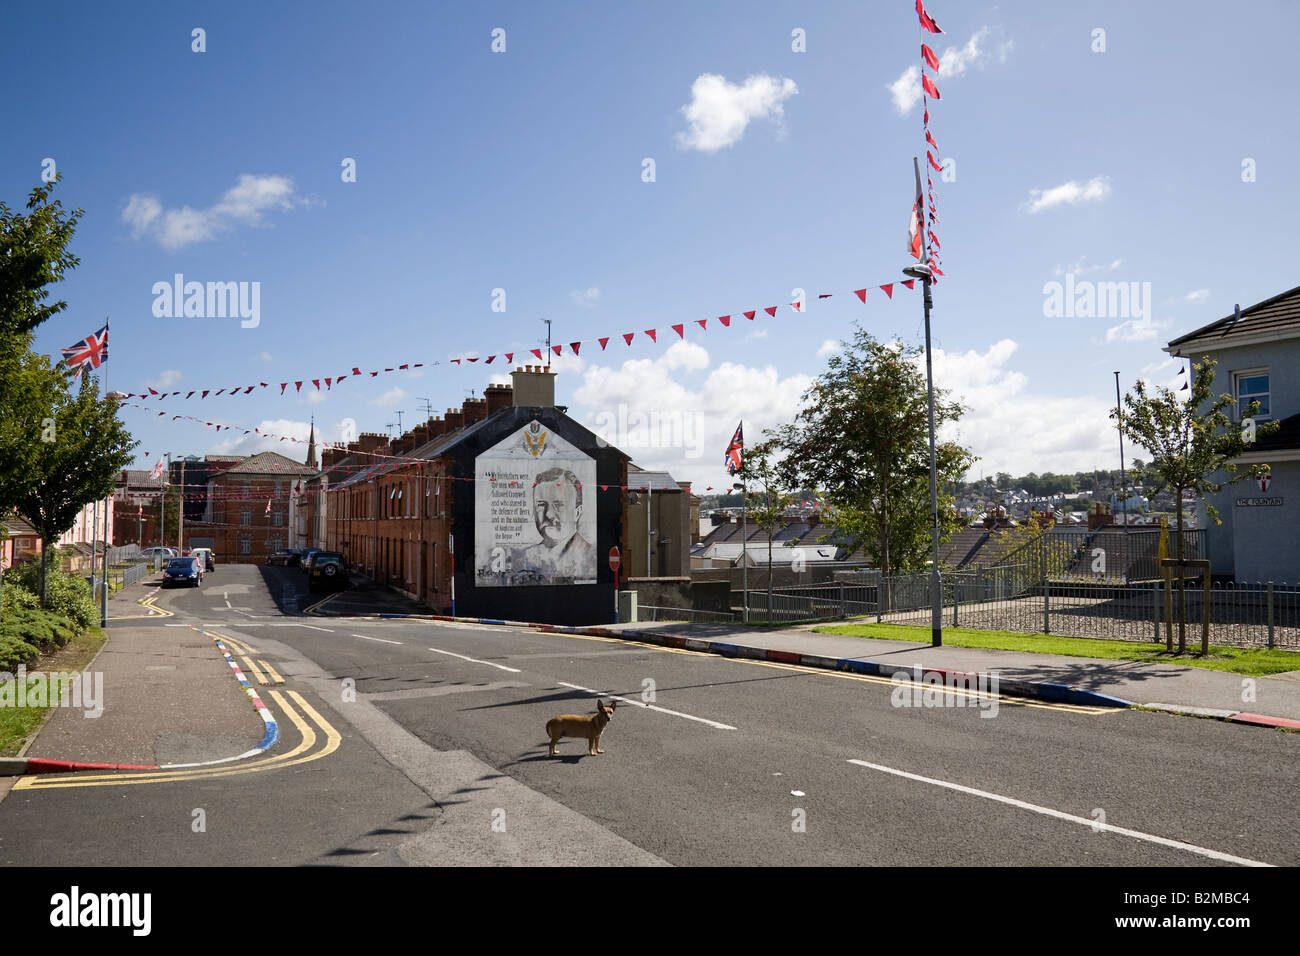 Unionist flags and murals in The Fountain district of Londonderry, County Derry, Northern Ireland Stock Photo